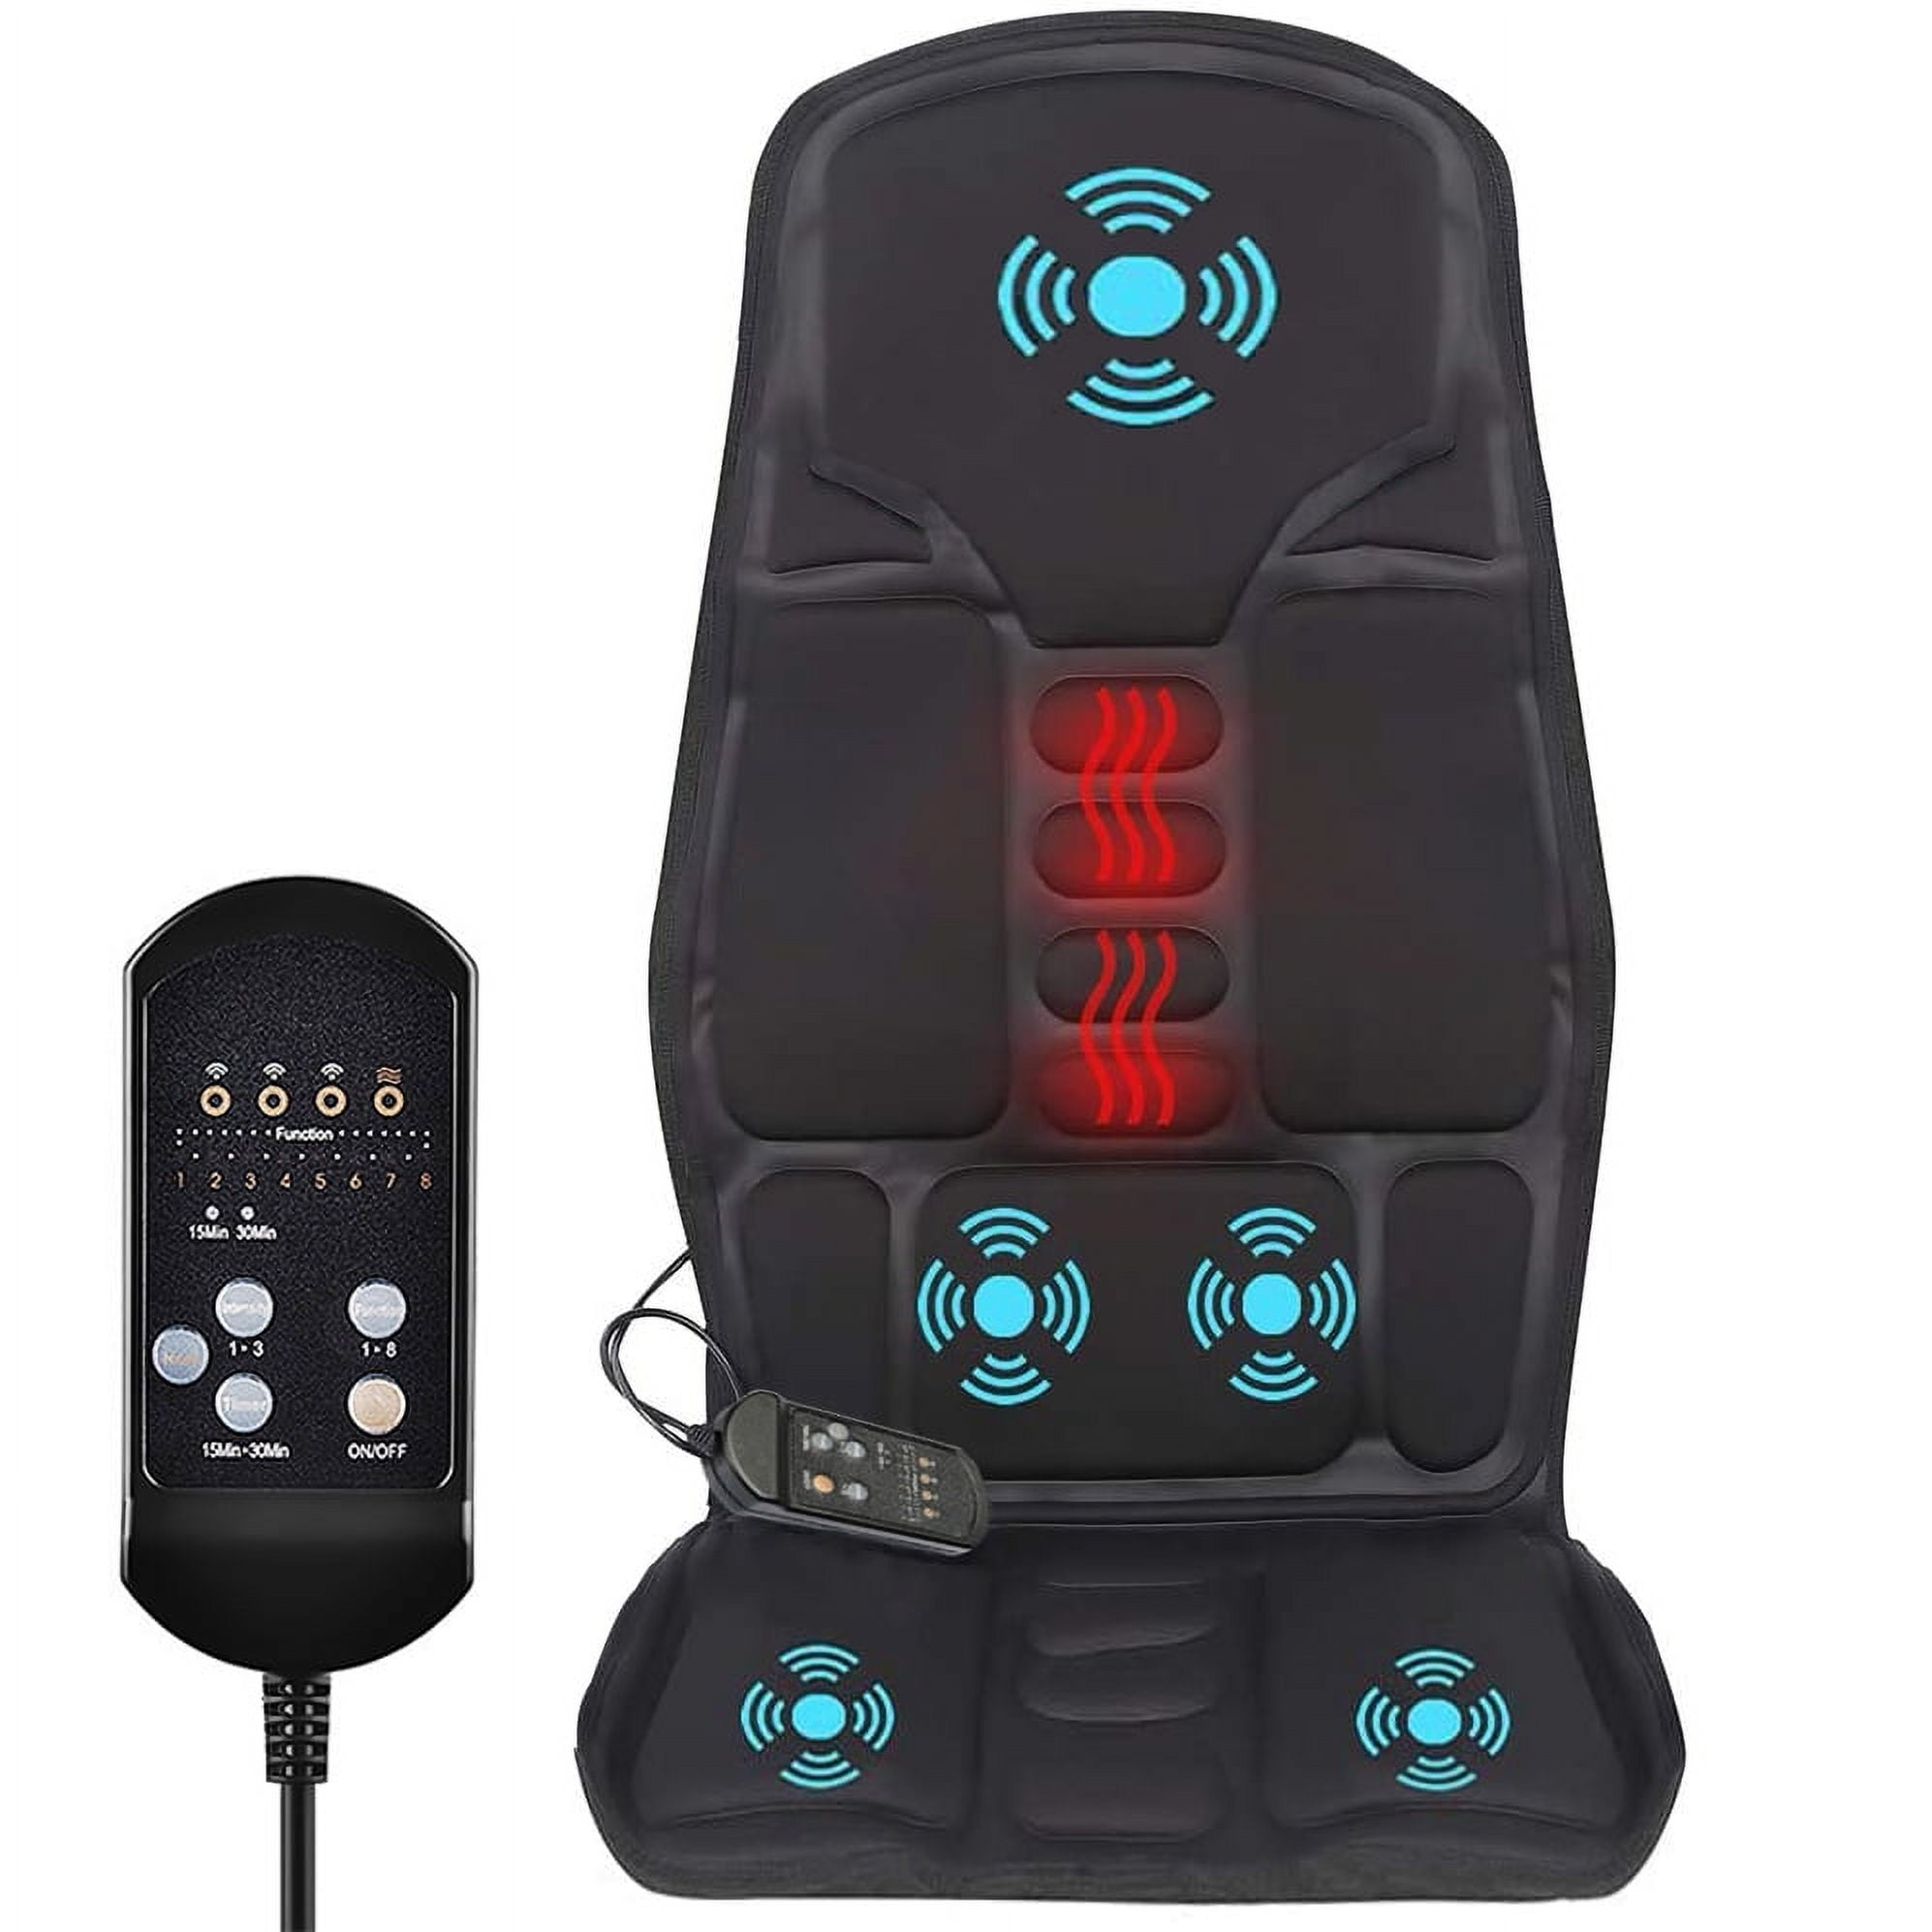 Vibration Massage Mat with Heat, Massage Cushion Seat Massager for Chair with 5 Vibrating Modes for Home Office Use - Walmart.com